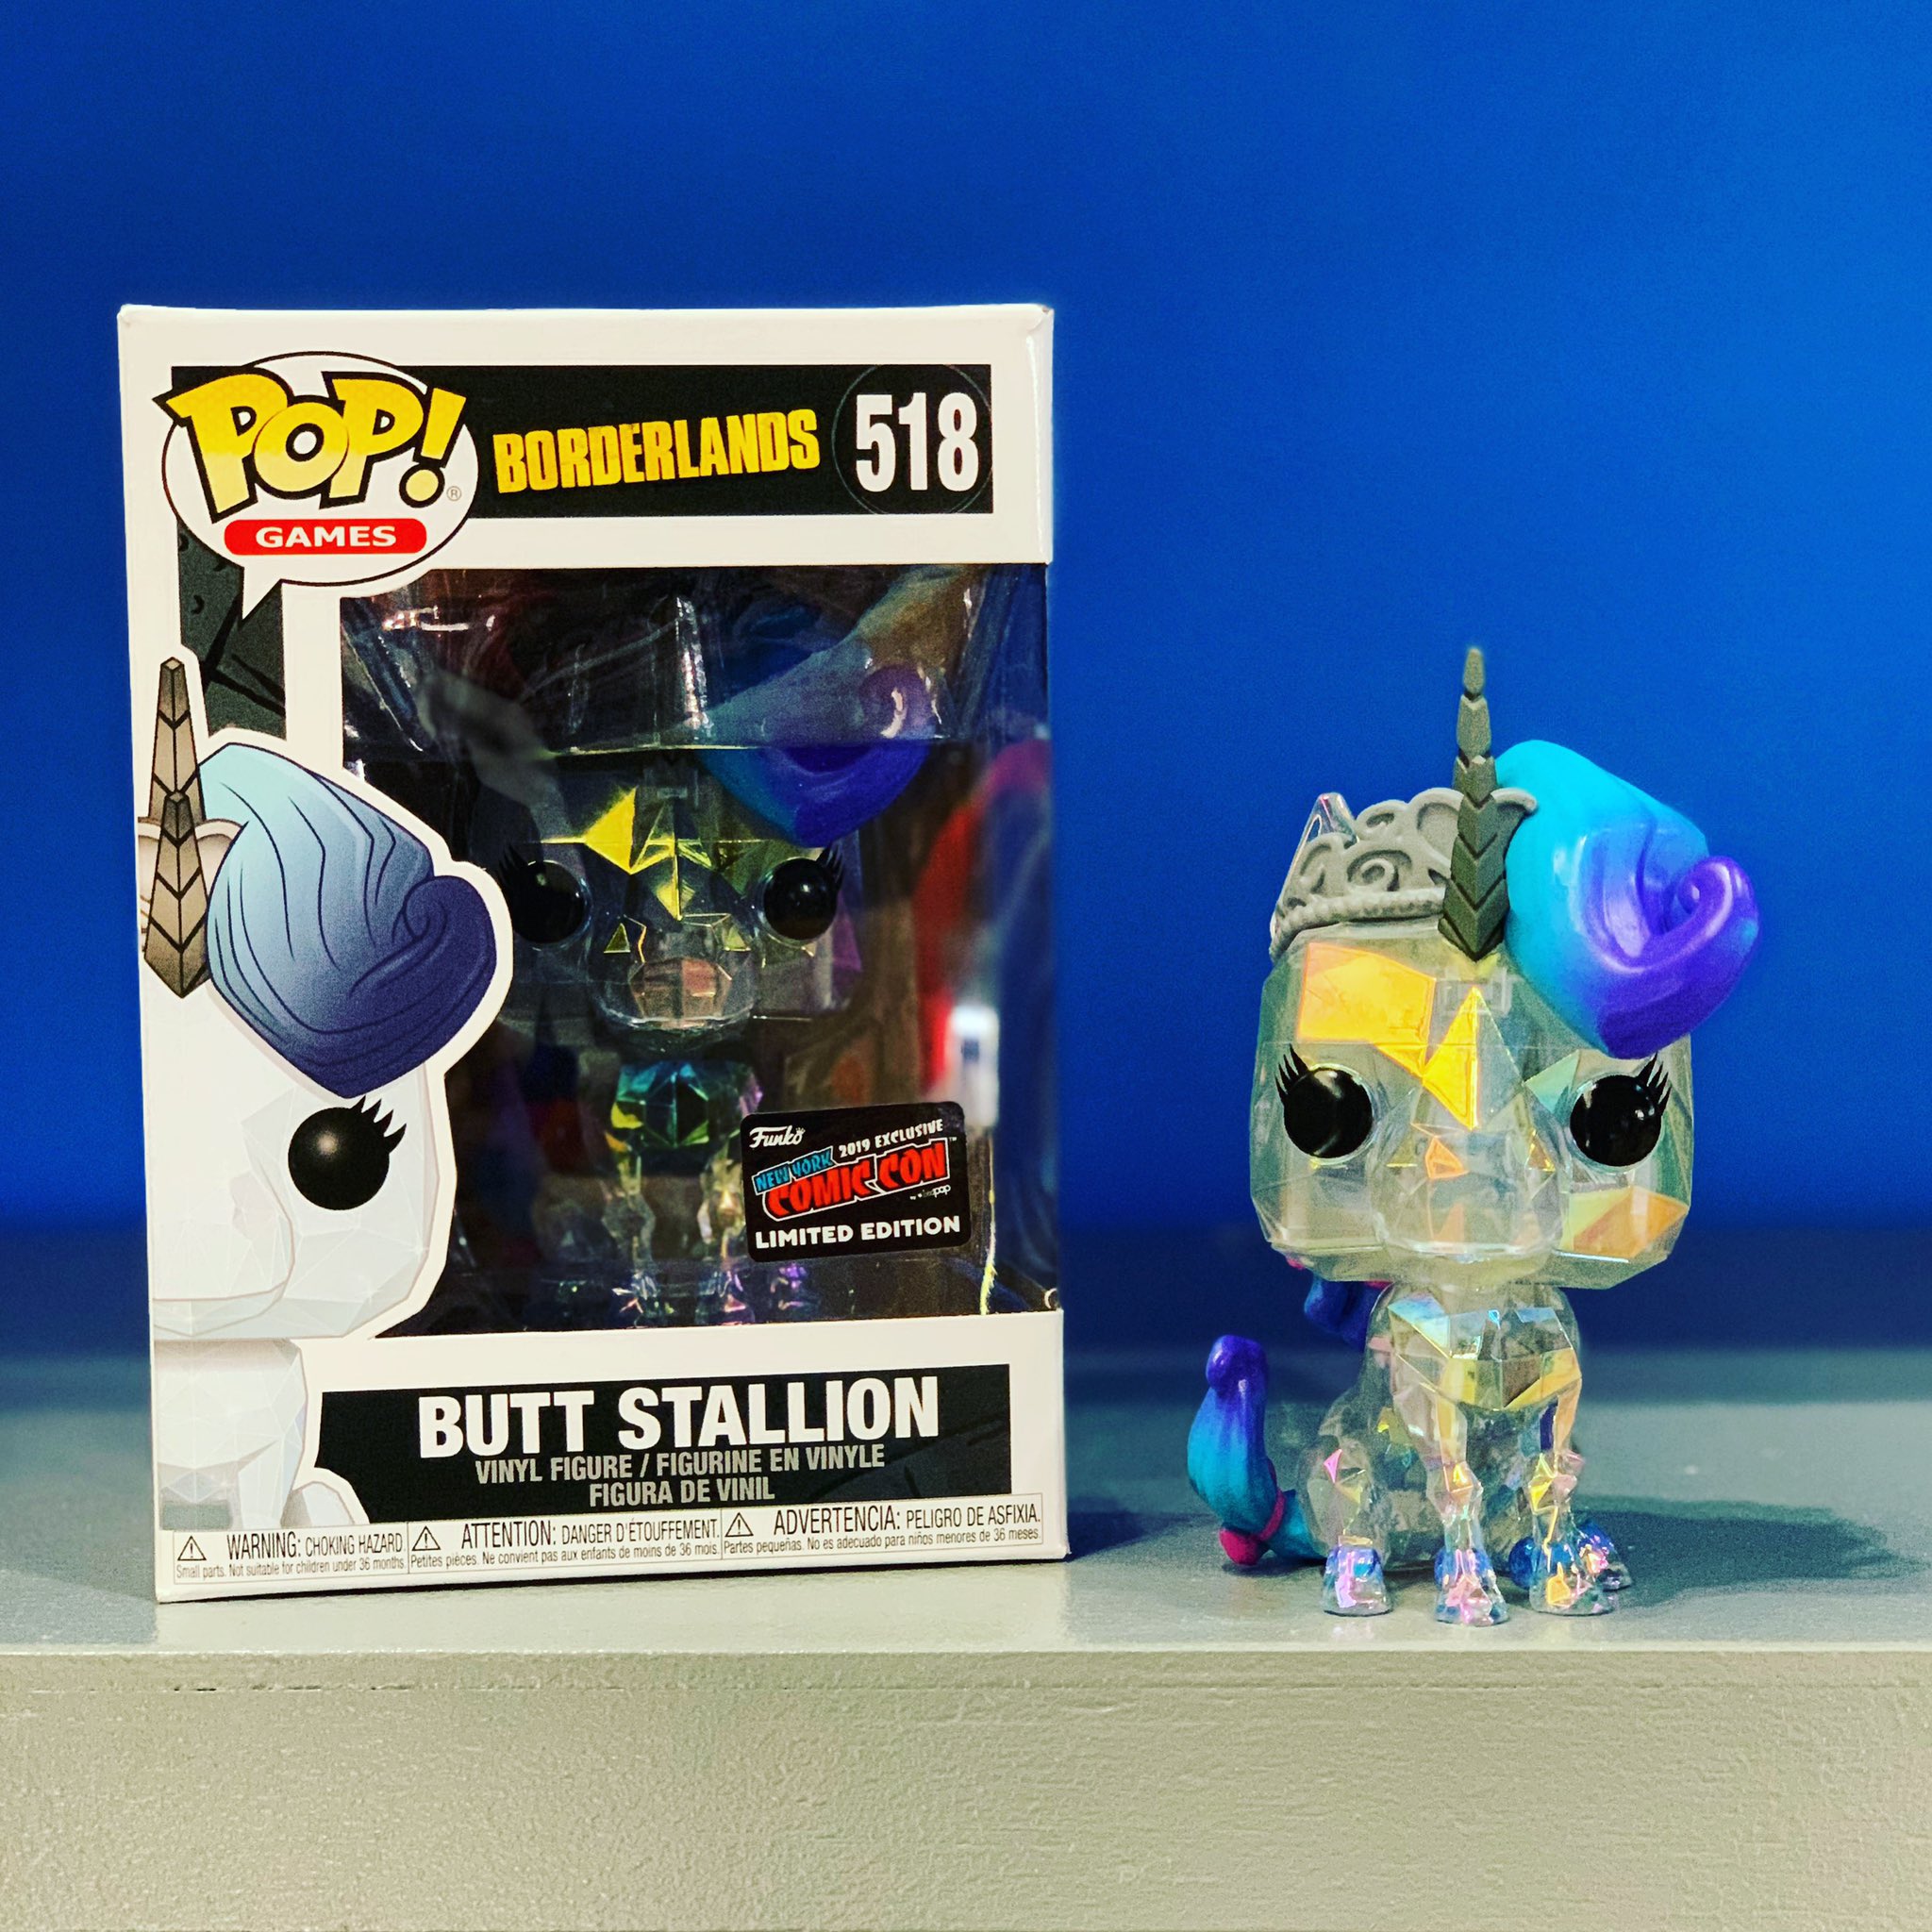 Sløset vaskepulver Slid Funko on Twitter: "Here's an out of box look at our @NY_Comic_Con exclusive Butt  Stallion Pop! ✨ Which @Borderlands Pop! should we make next? #FunkoNYCC  https://t.co/7ZOqx6vUjn" / Twitter